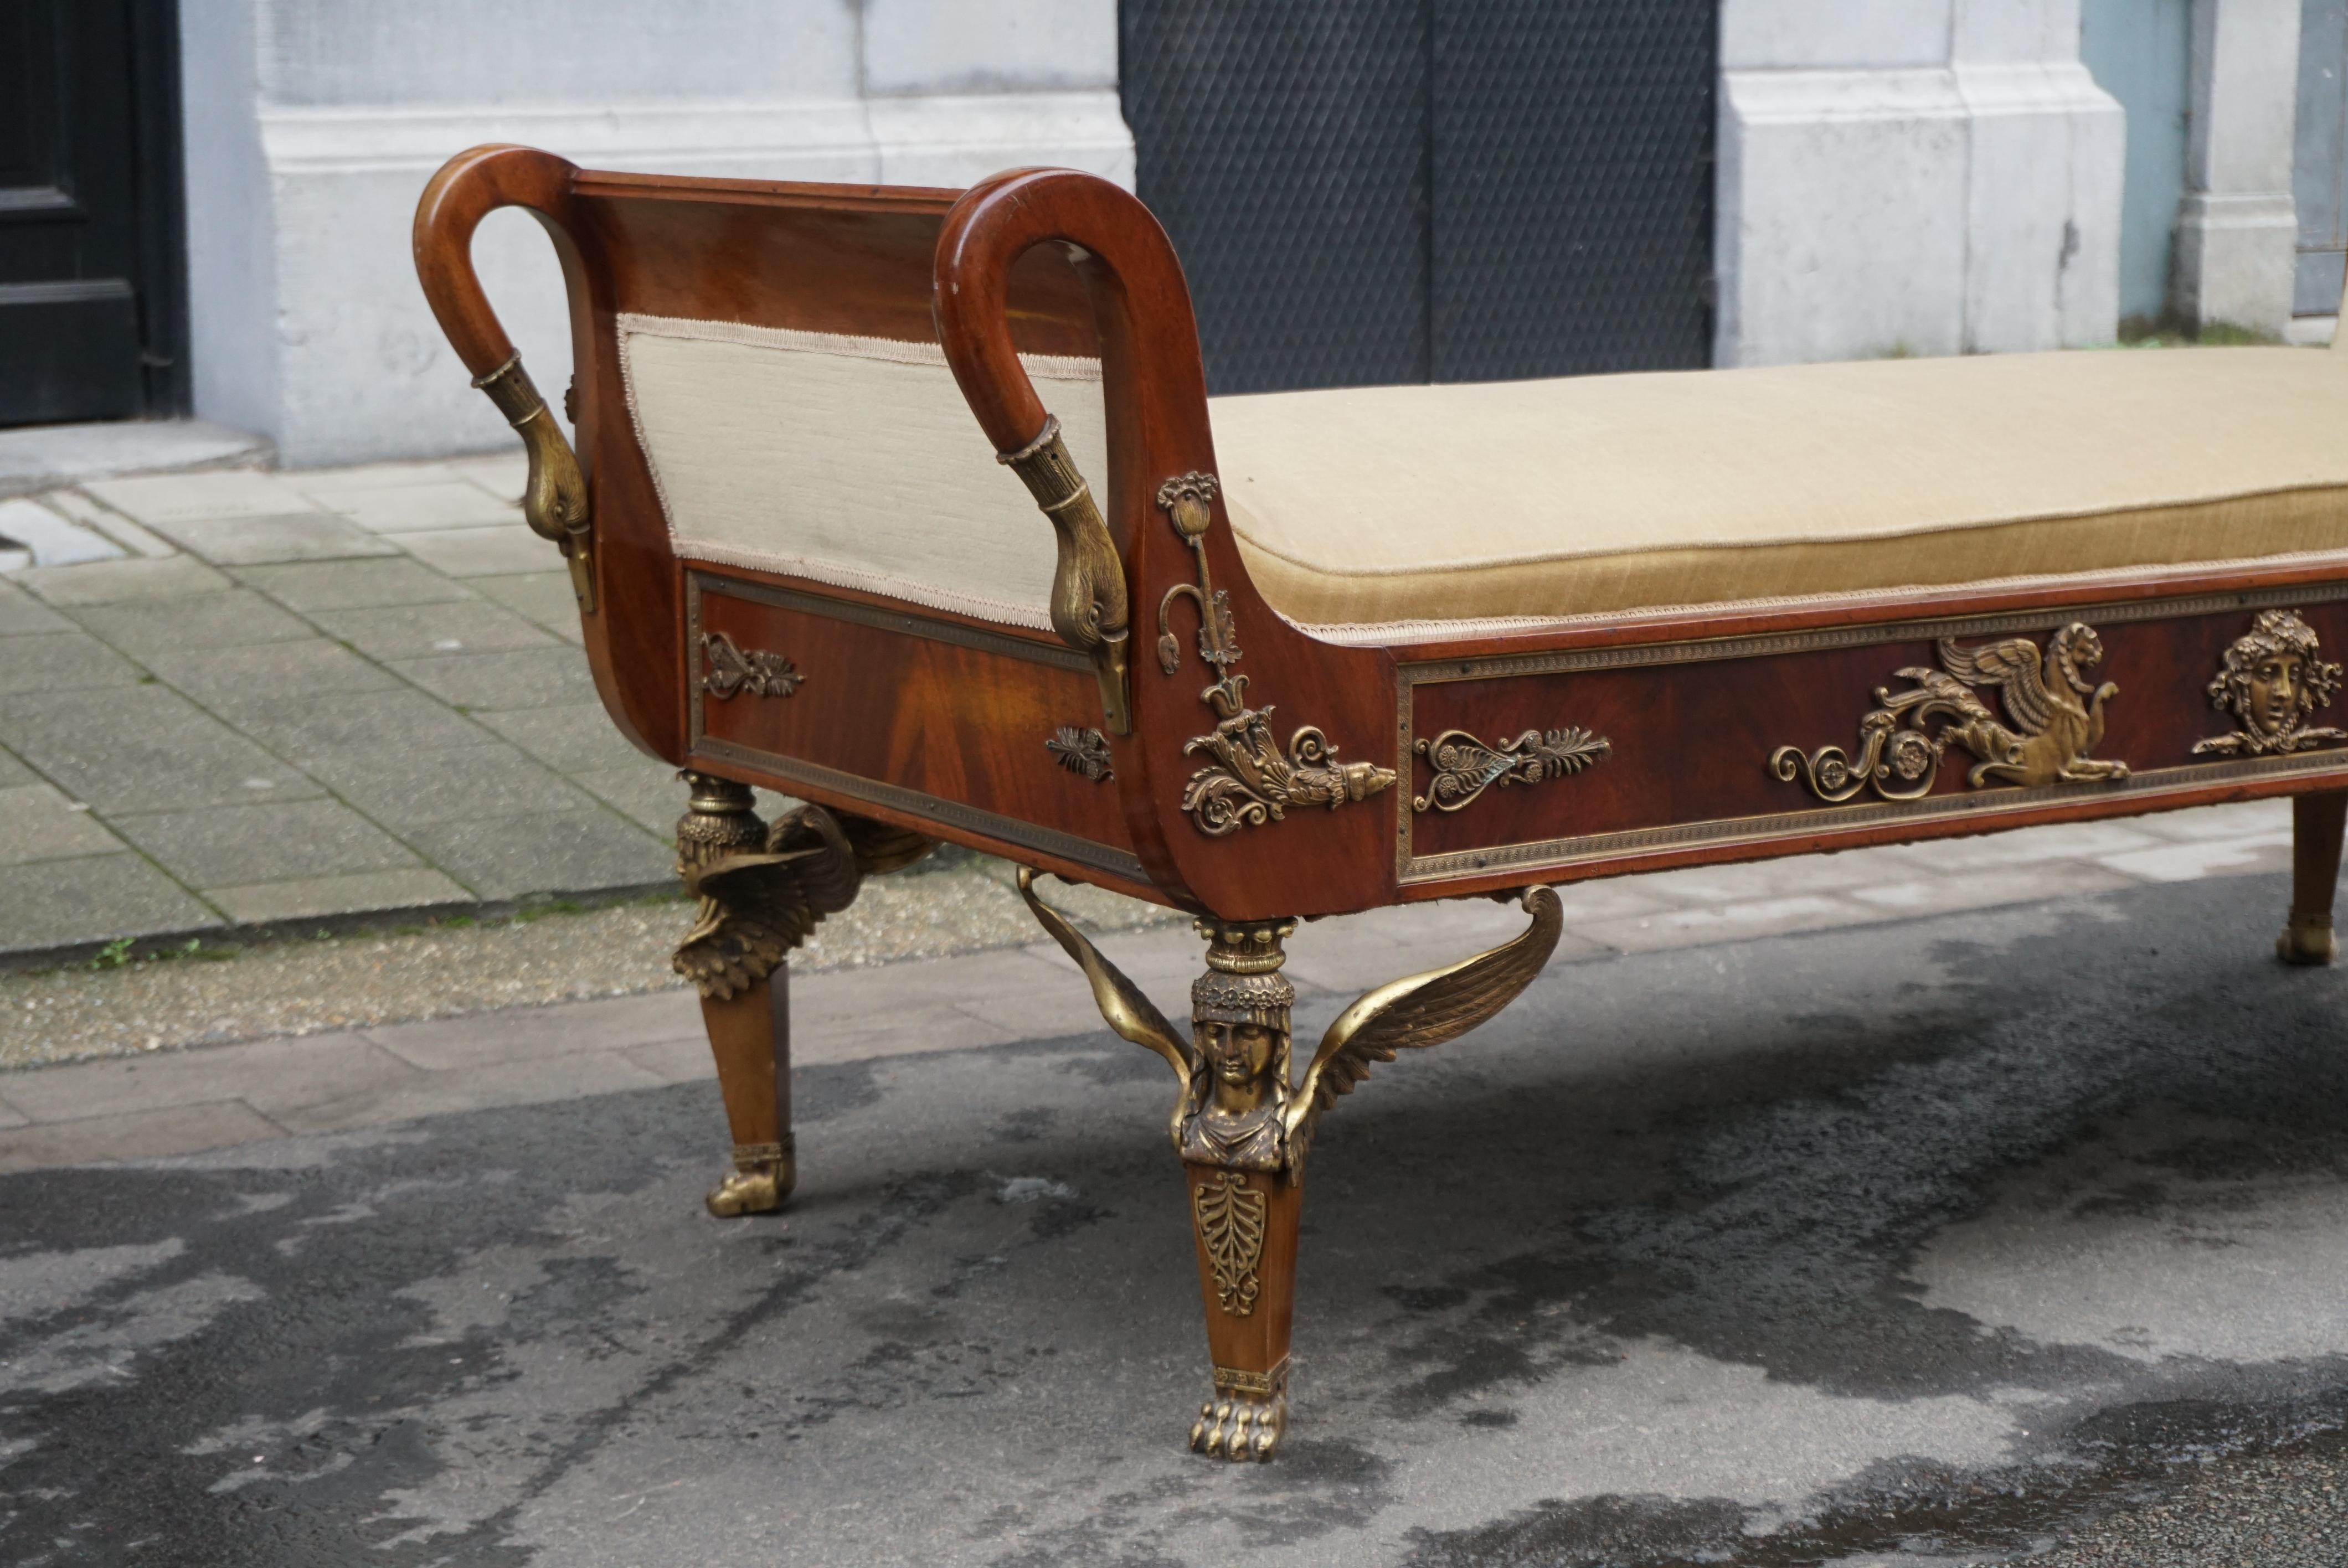 Incredible Gilt Bronze-Mounted Swan Neck Daybed in French Empire Style For Sale 5